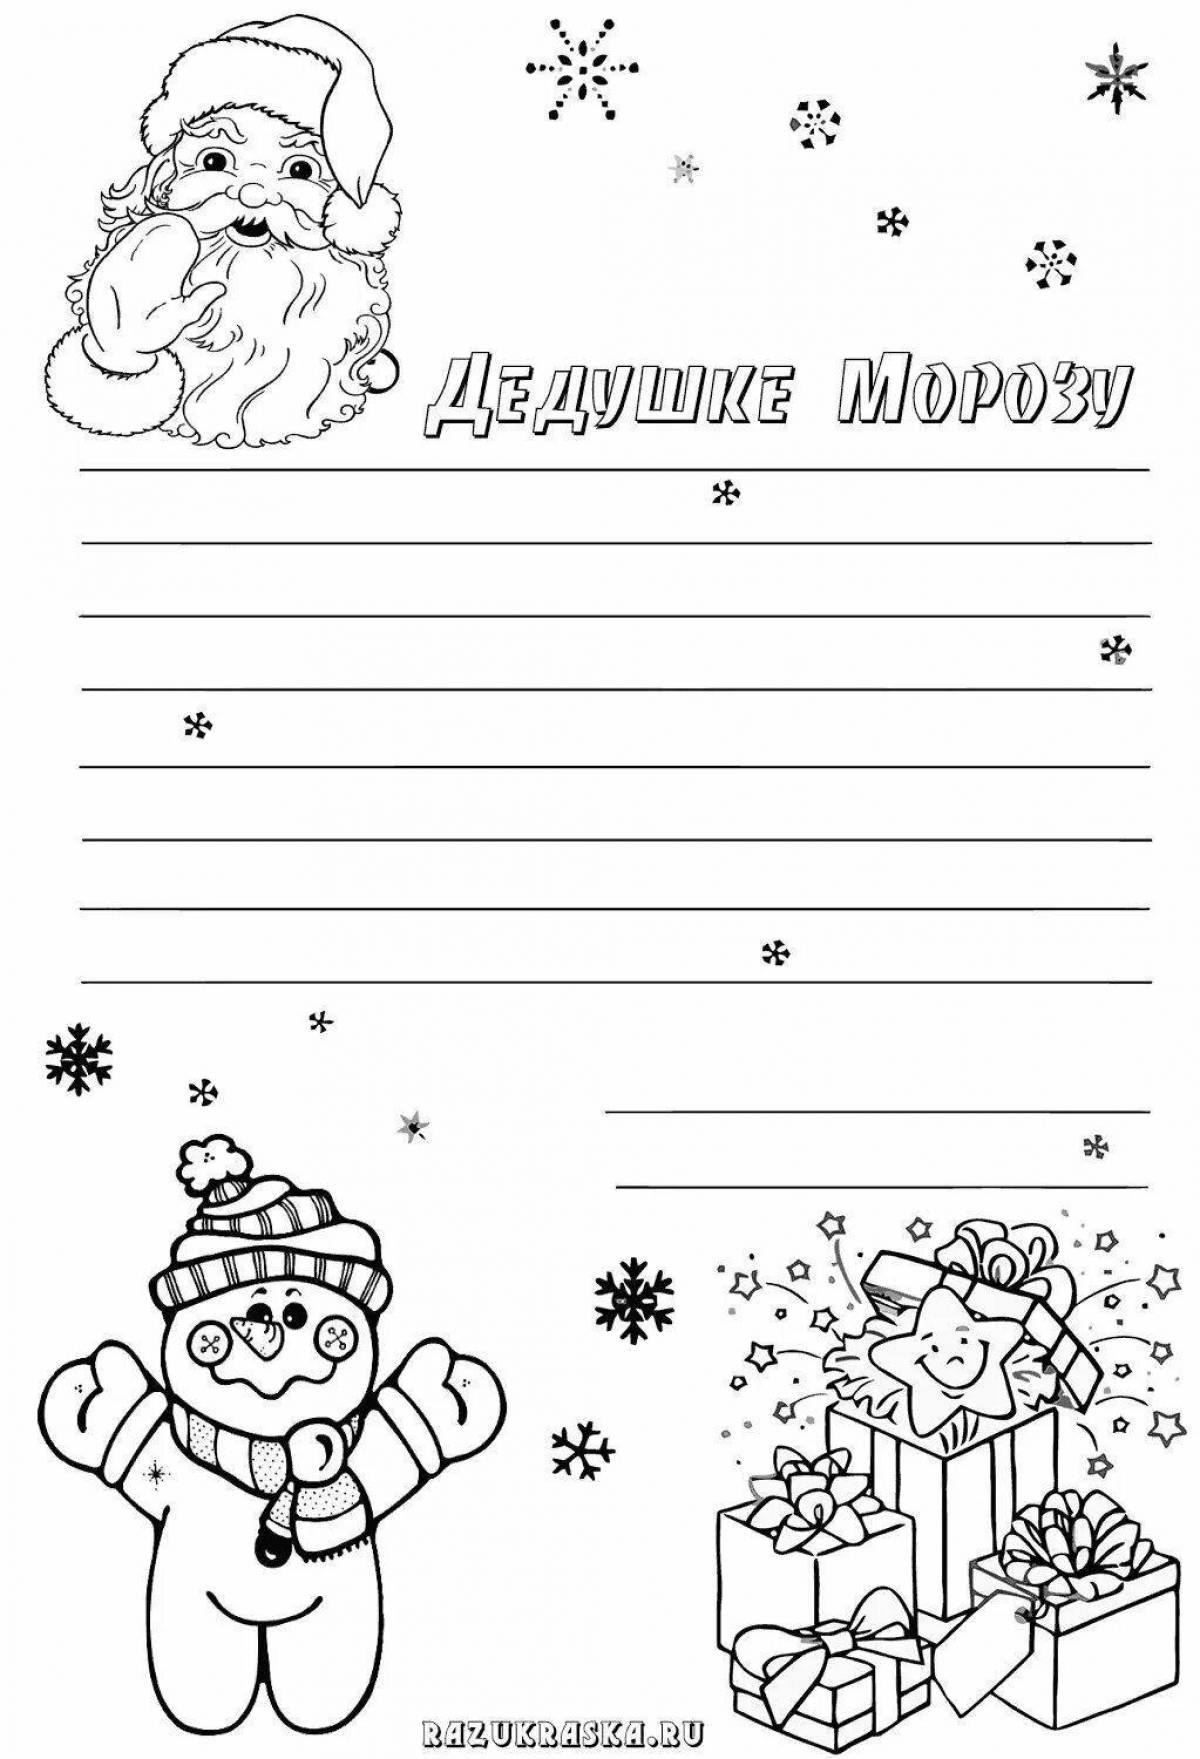 Magic coloring letter to santa claus template